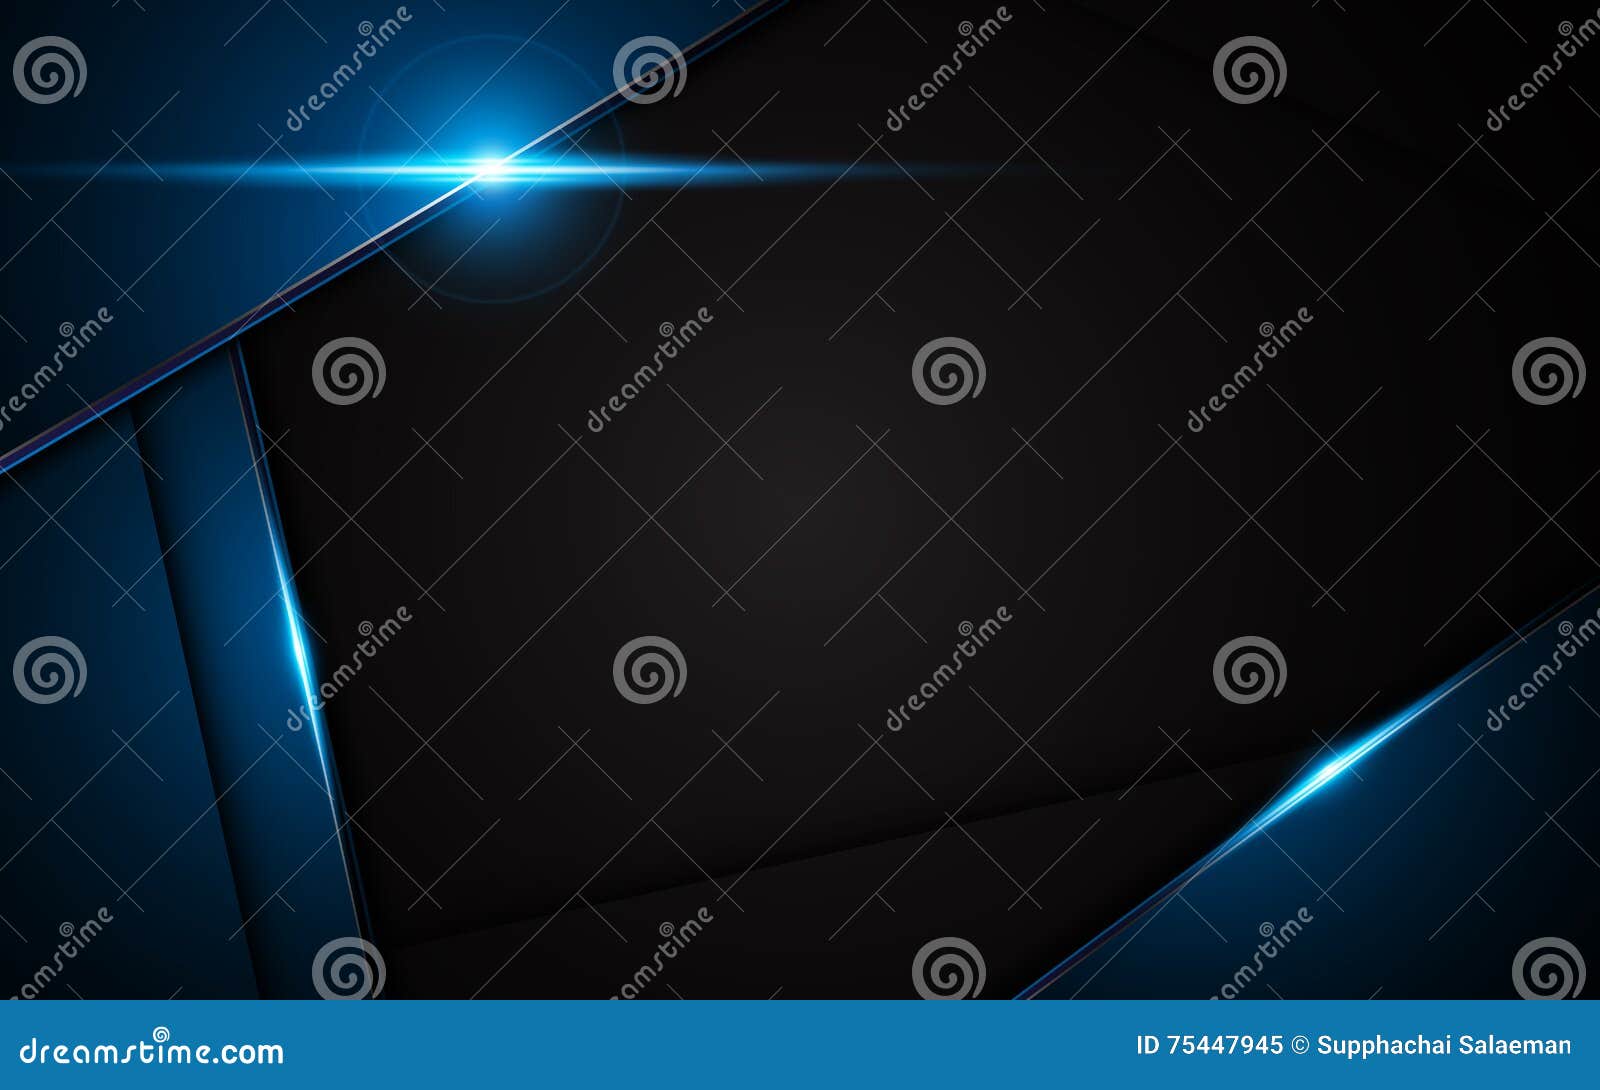 abstract metallic blue black frame  innovation concept layout background